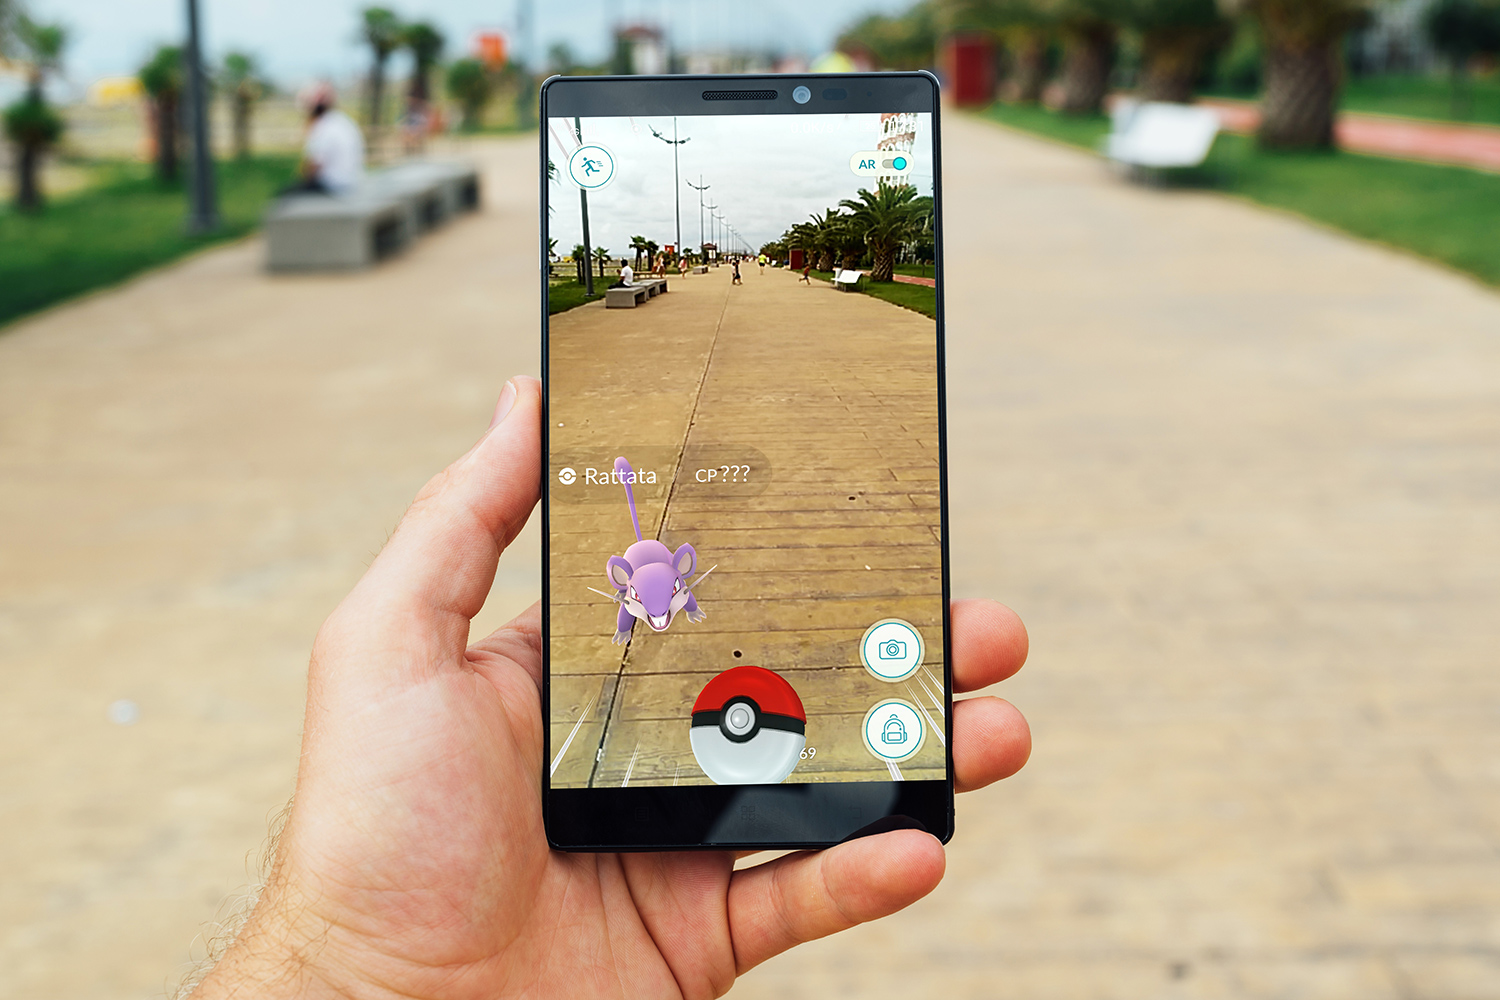 Pokemon GO and the future of in-store augmented reality